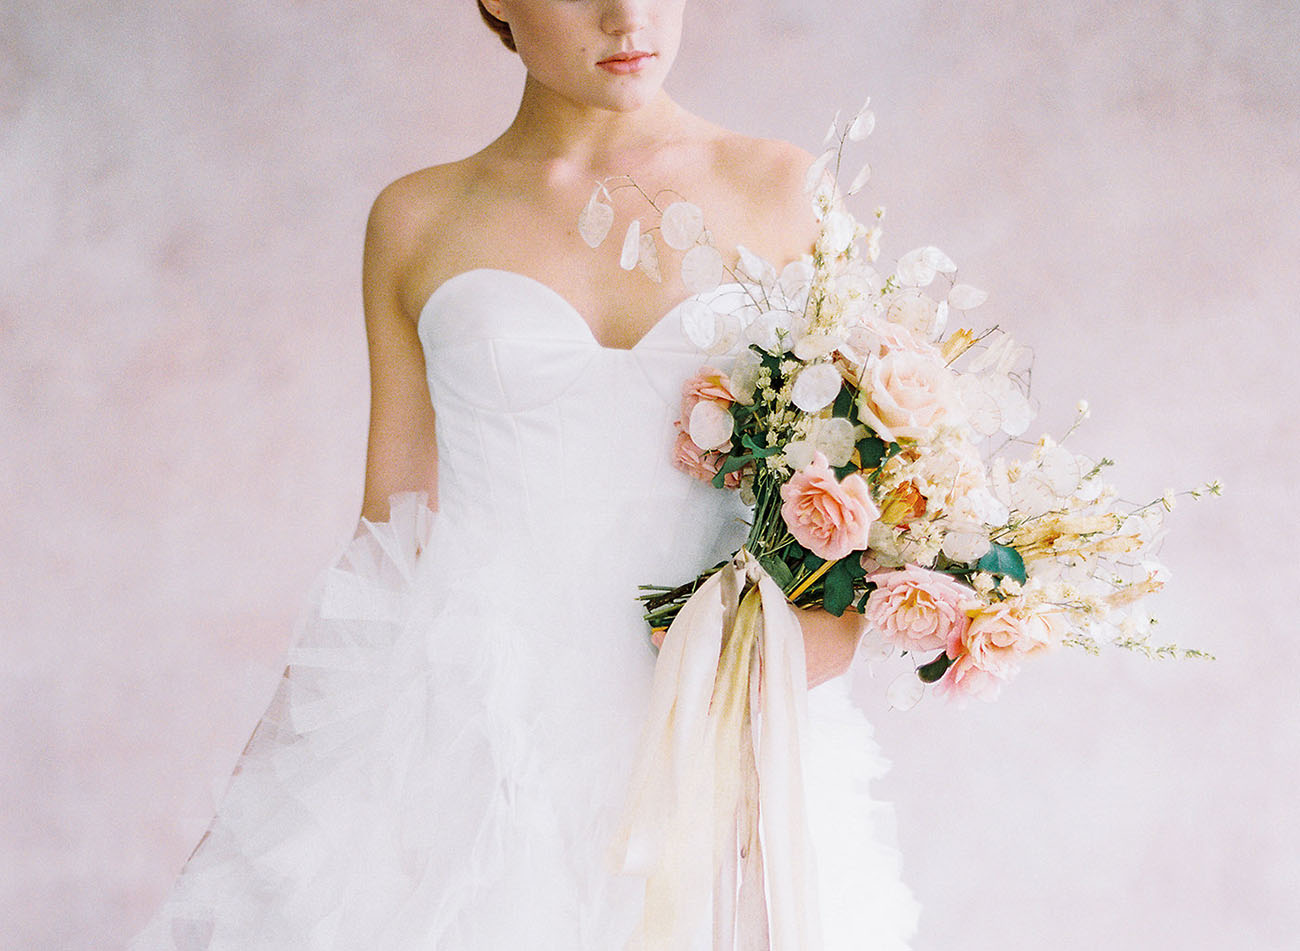 The ethereal bridal bouquet was done with blush roses and some airy touches